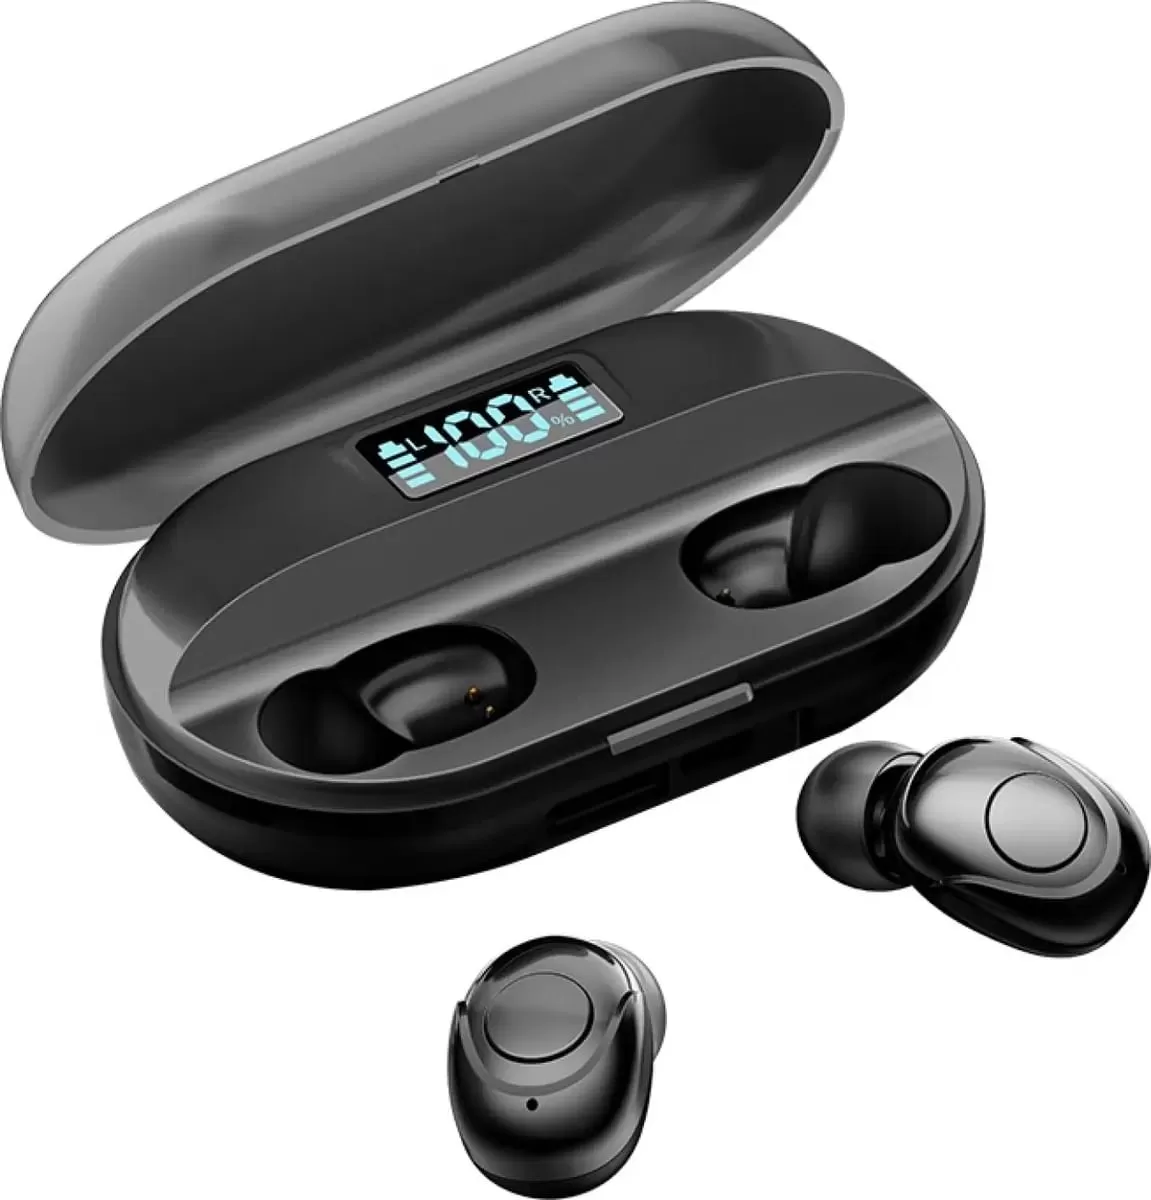 Branded Tws T2 Buds Wireless Bluetooth EarBuds 9D HIFI Sound Stereo Earphones with Power bank Pod bluetooth ear phone Ear Buds AIrdots Premium Quality